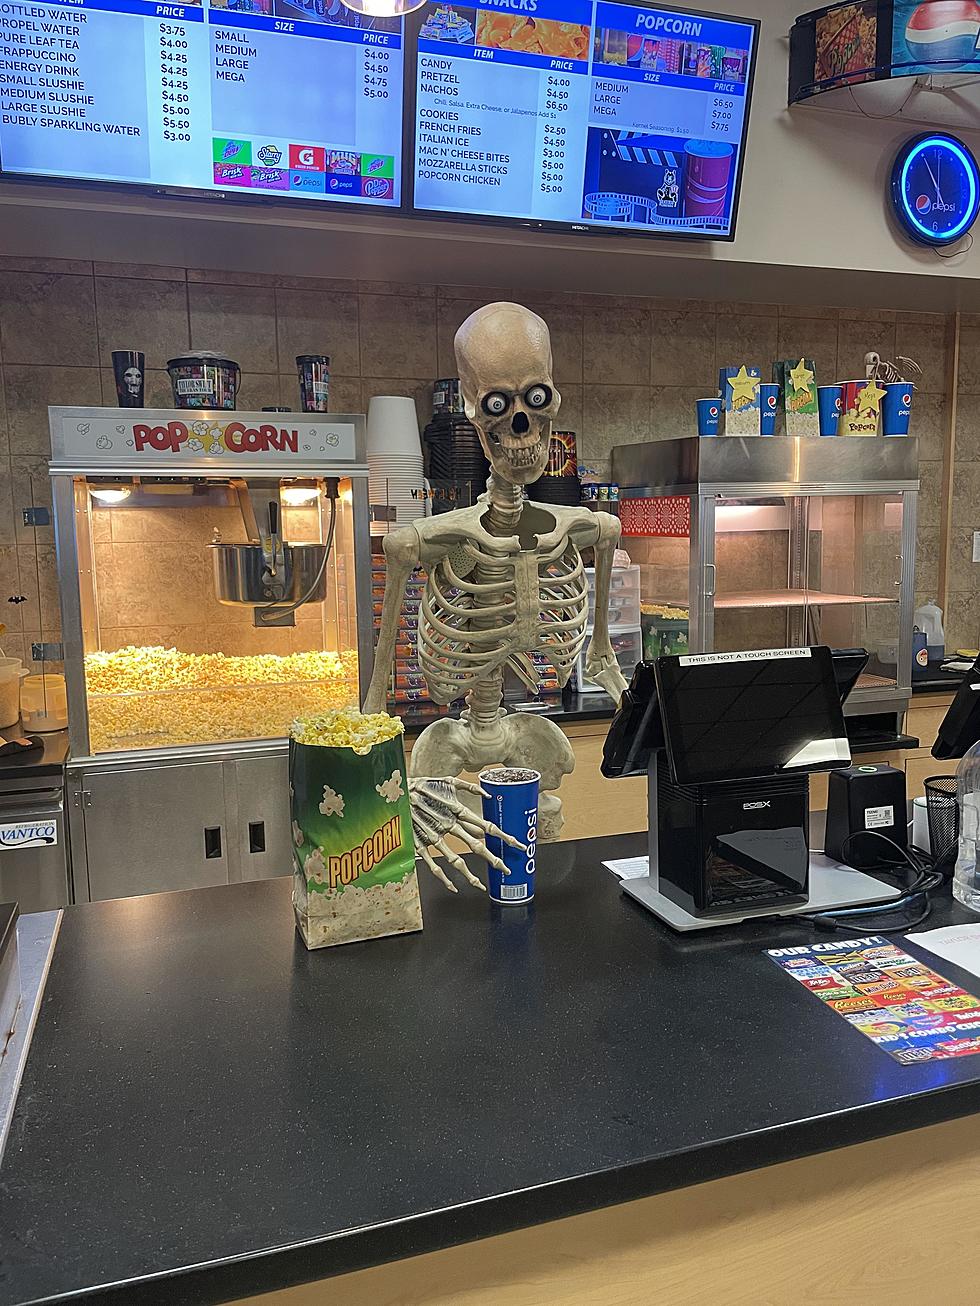 Local Movie Theater Goes All Out Decorating For Halloween